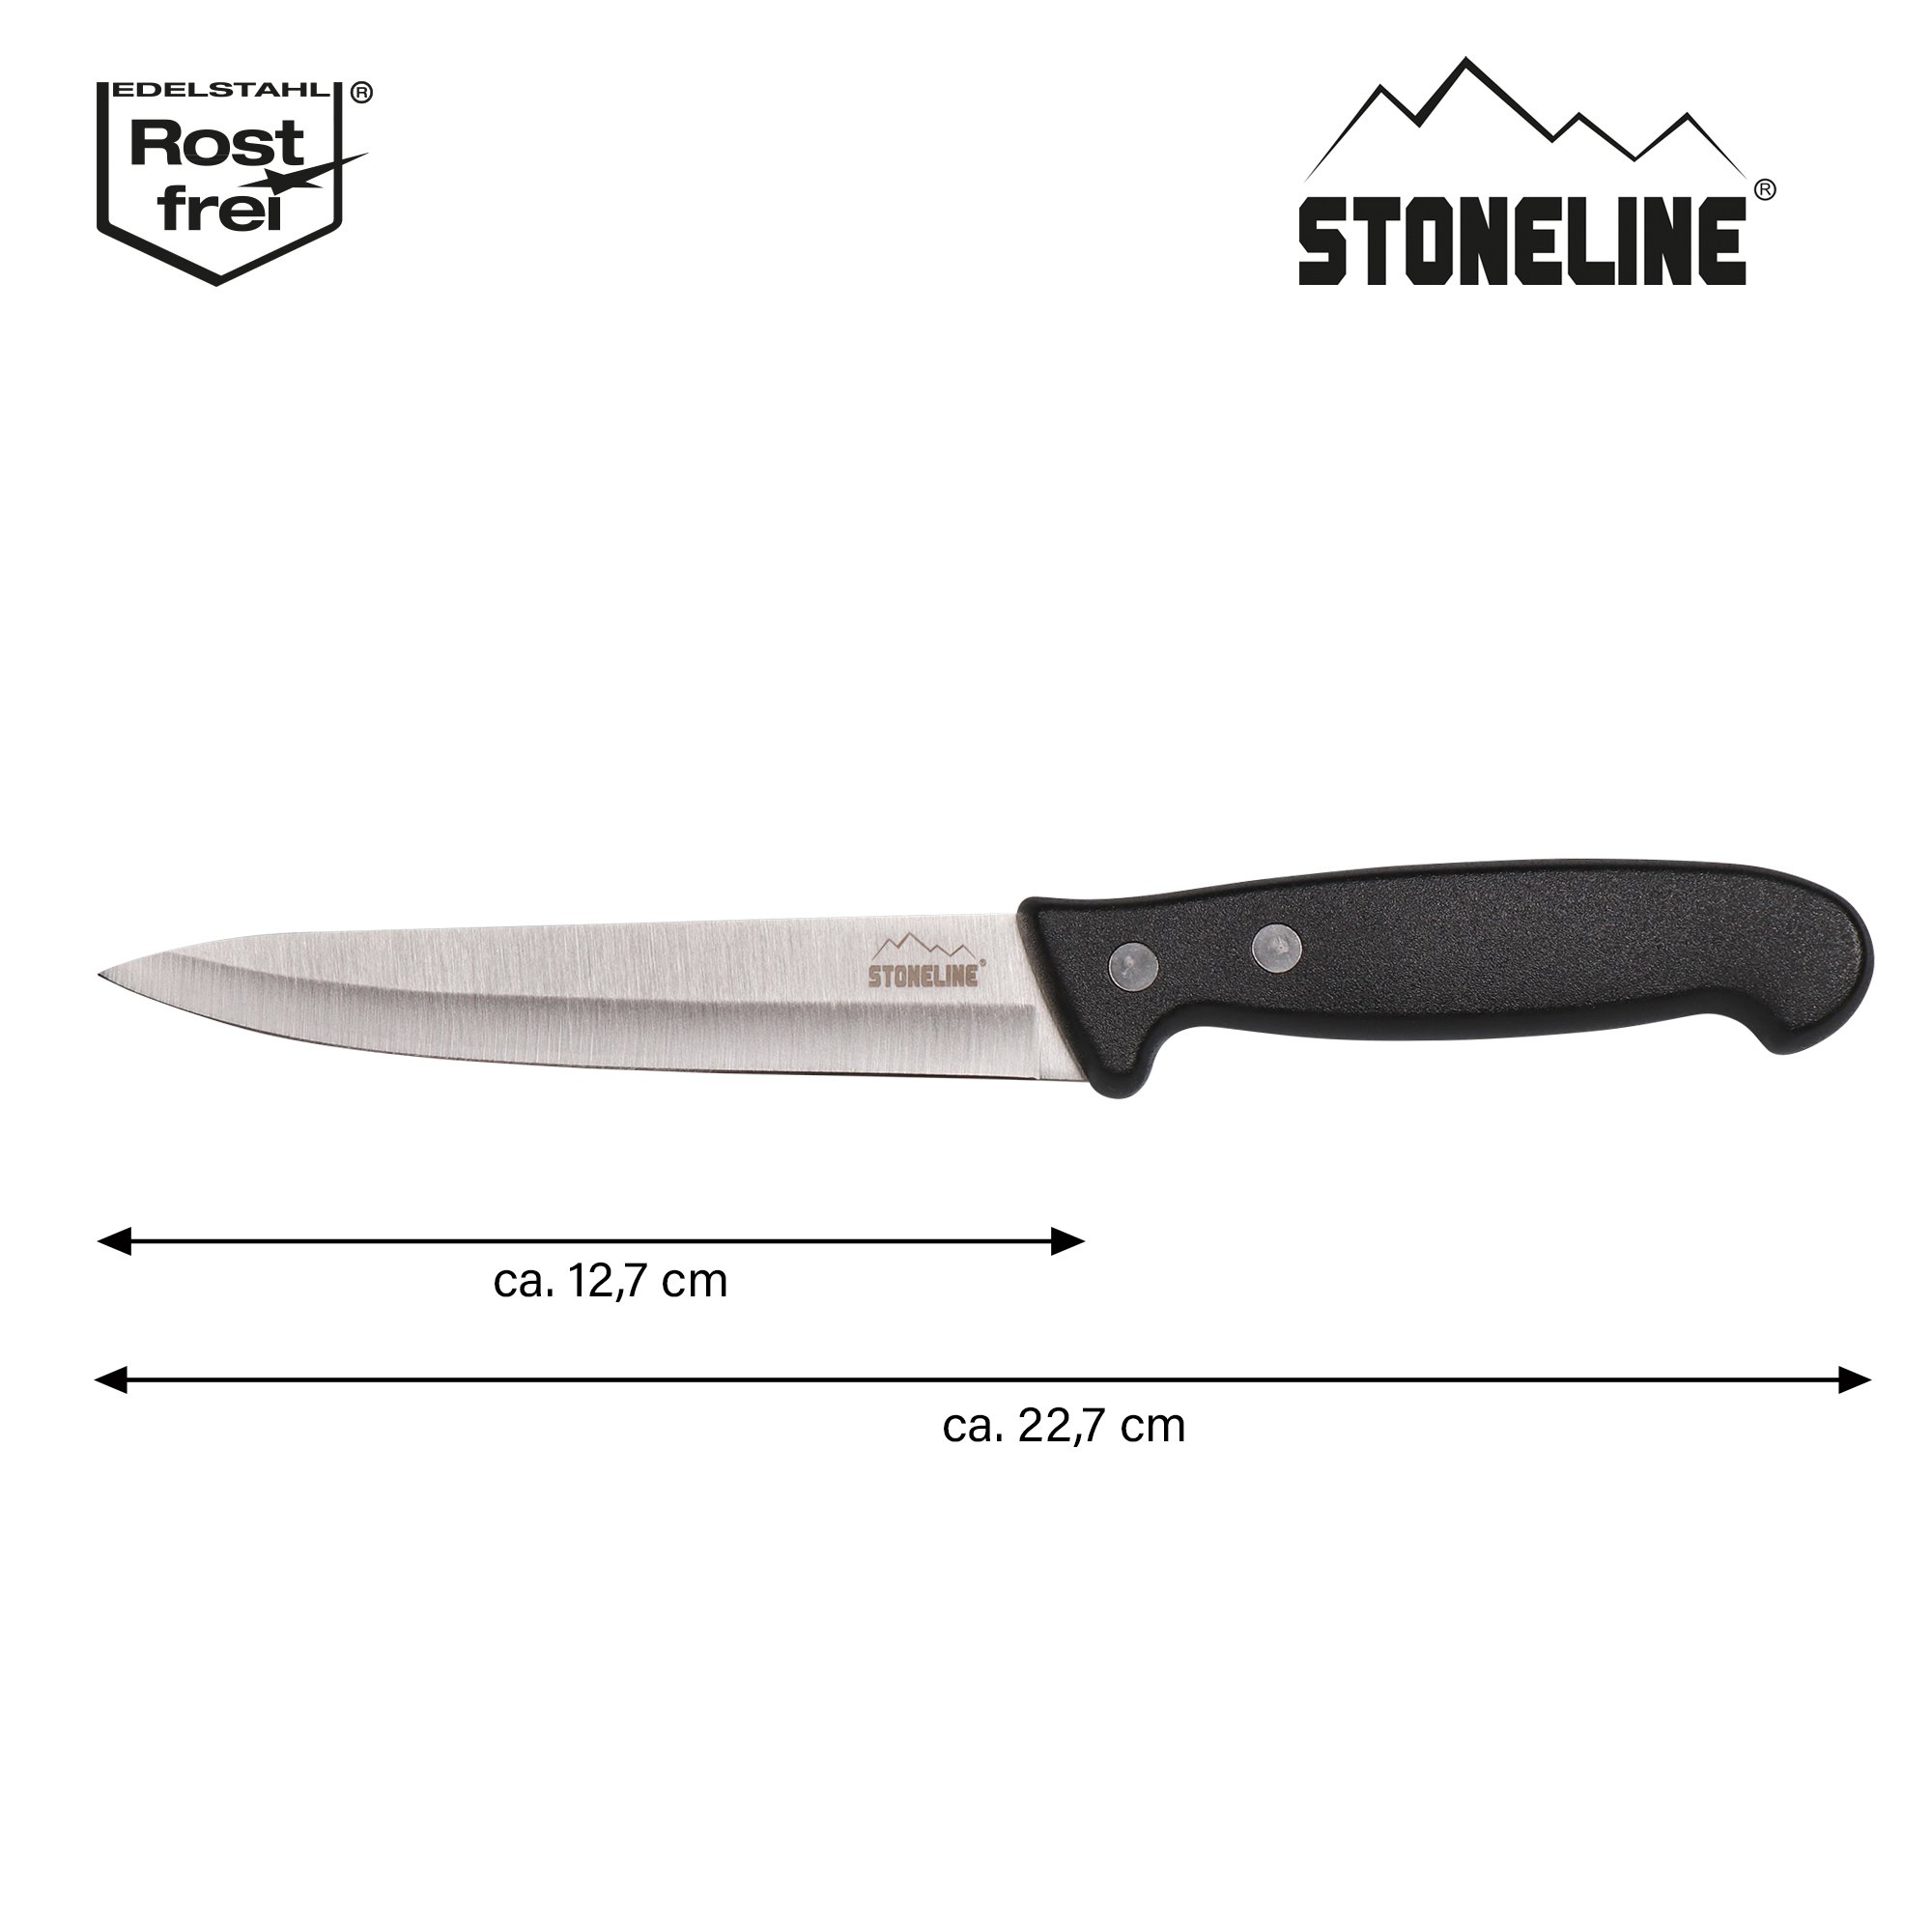 STONELINE® Stainless Steel Knife 22.7 cm All-Purpose Knife, Safety Sheath